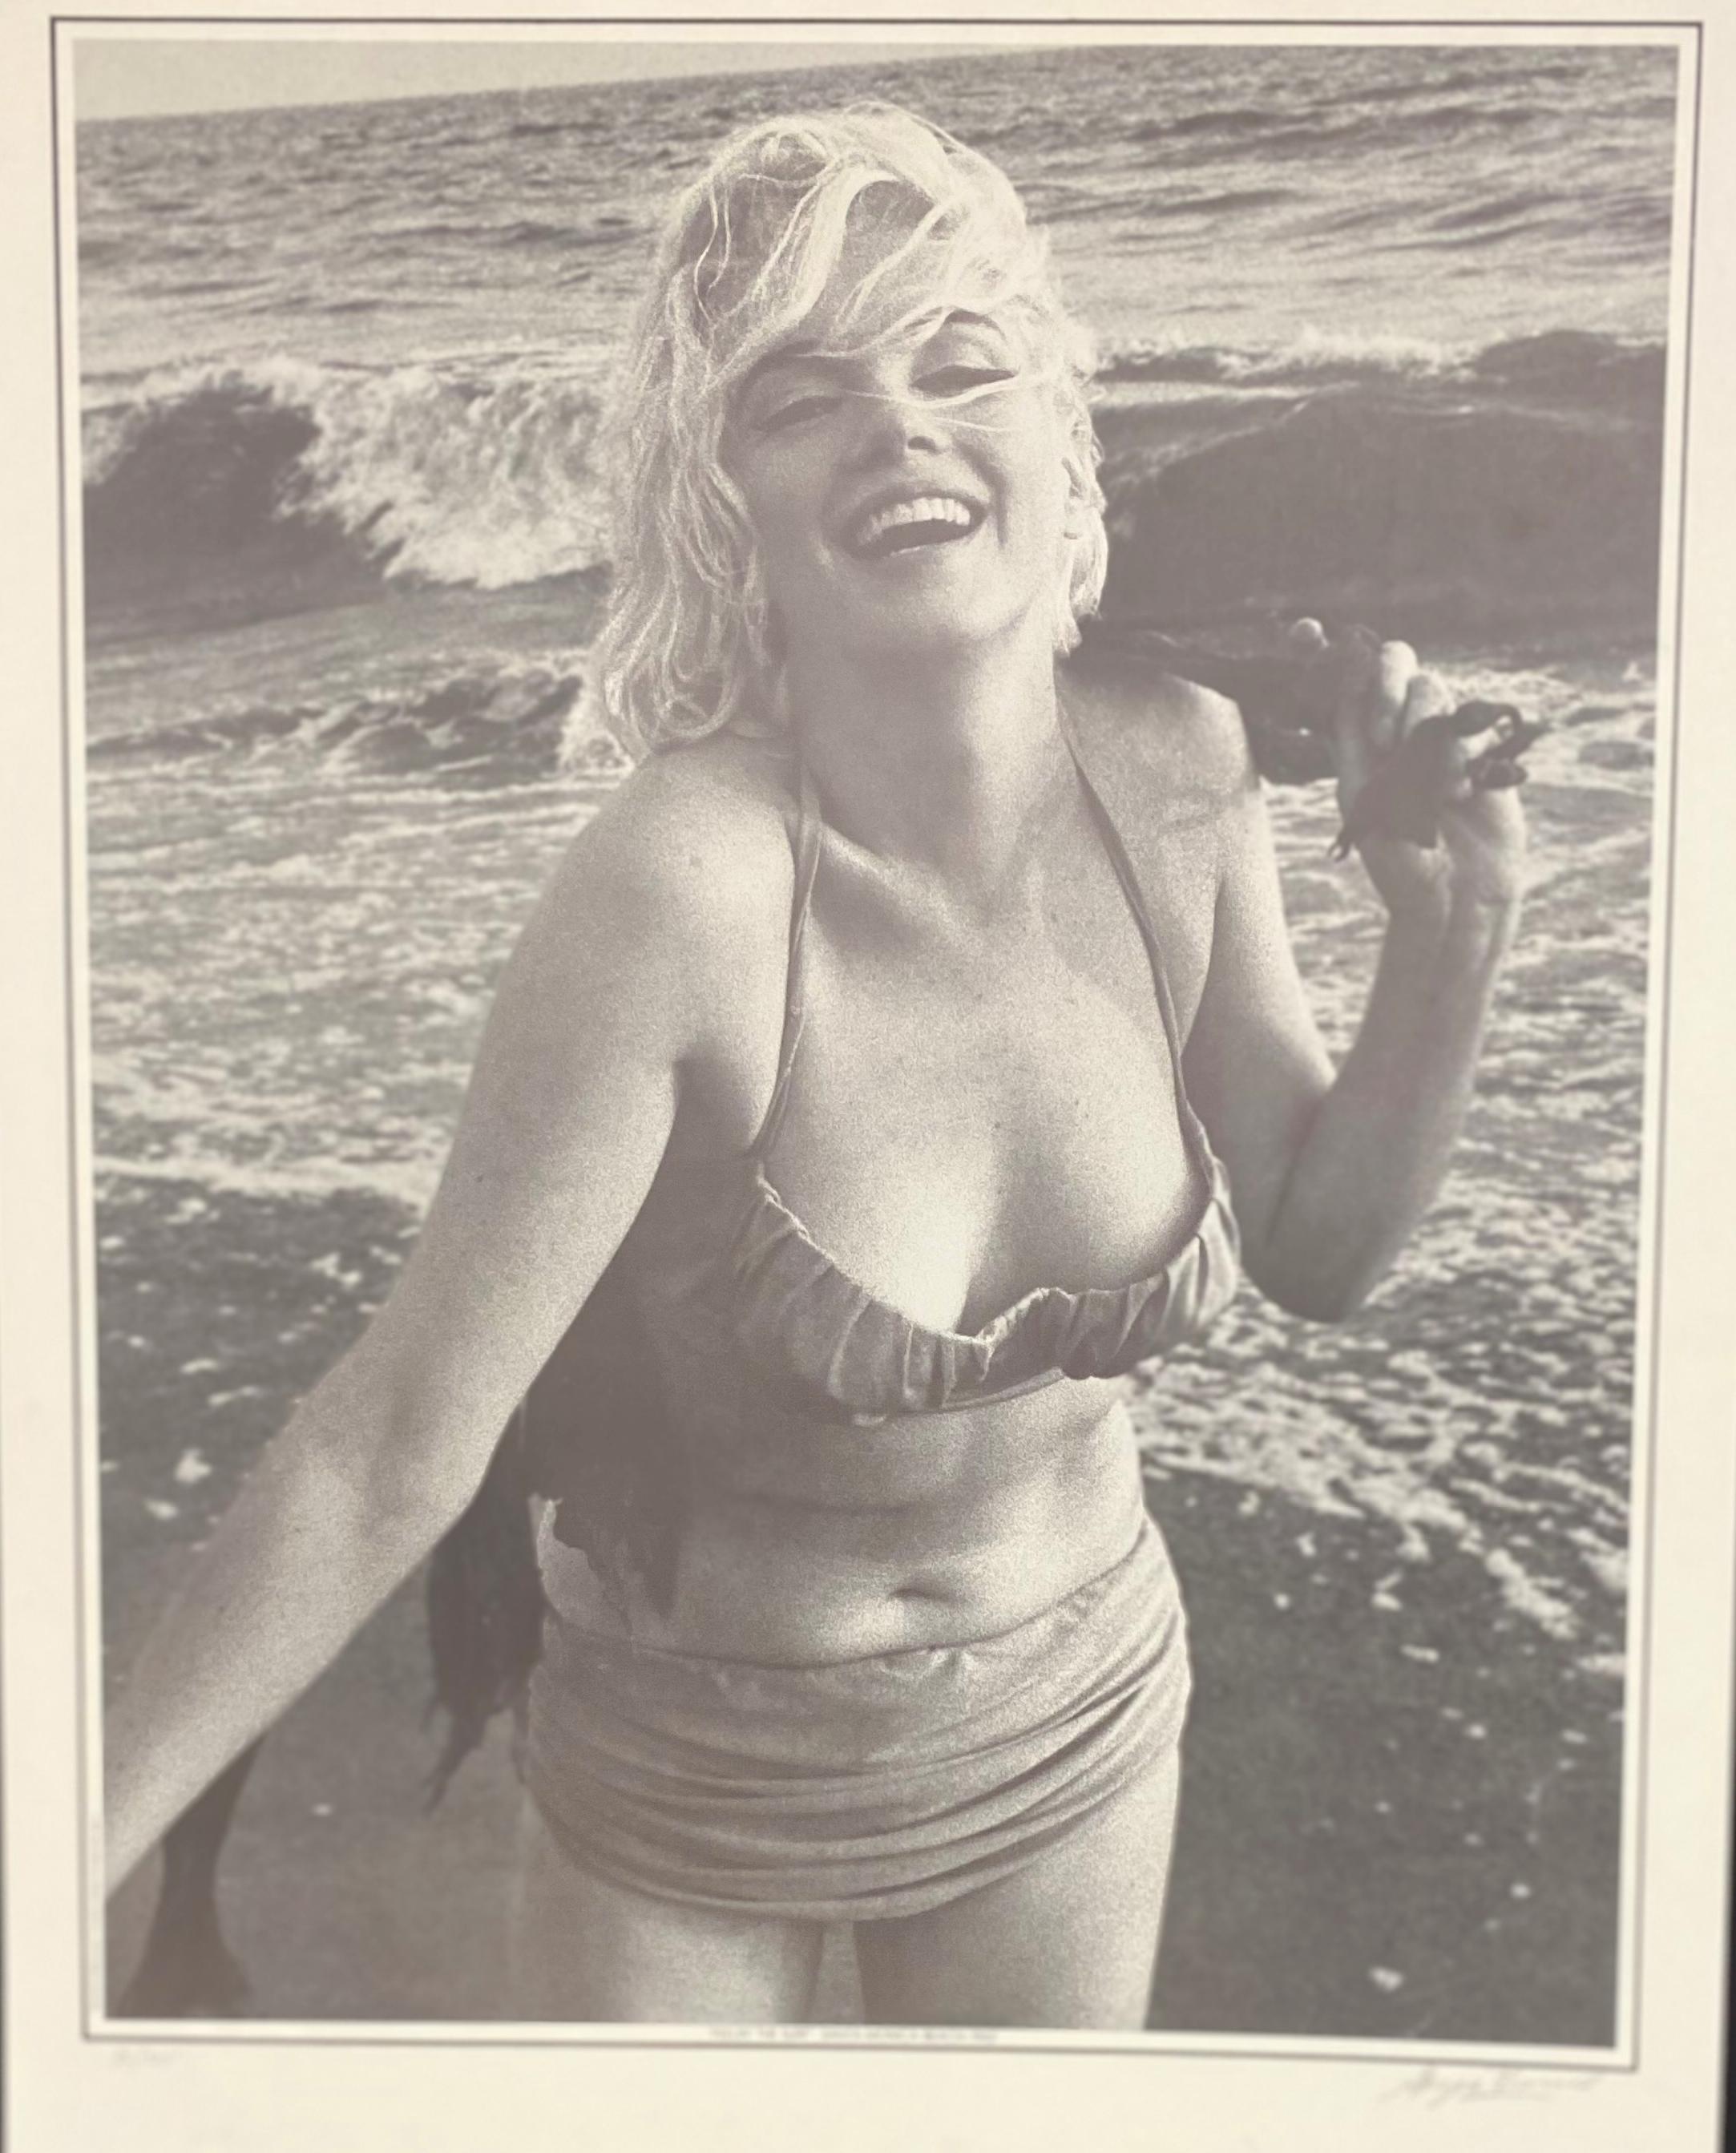 Taken at the beach in Santa Monica, California 2 1/2 weeks before her death,  this photograph is from the last ever photo shoot of Marilyn Monroe by the photographer George Barris. Photolithograph taken from original negative. Published by Edward